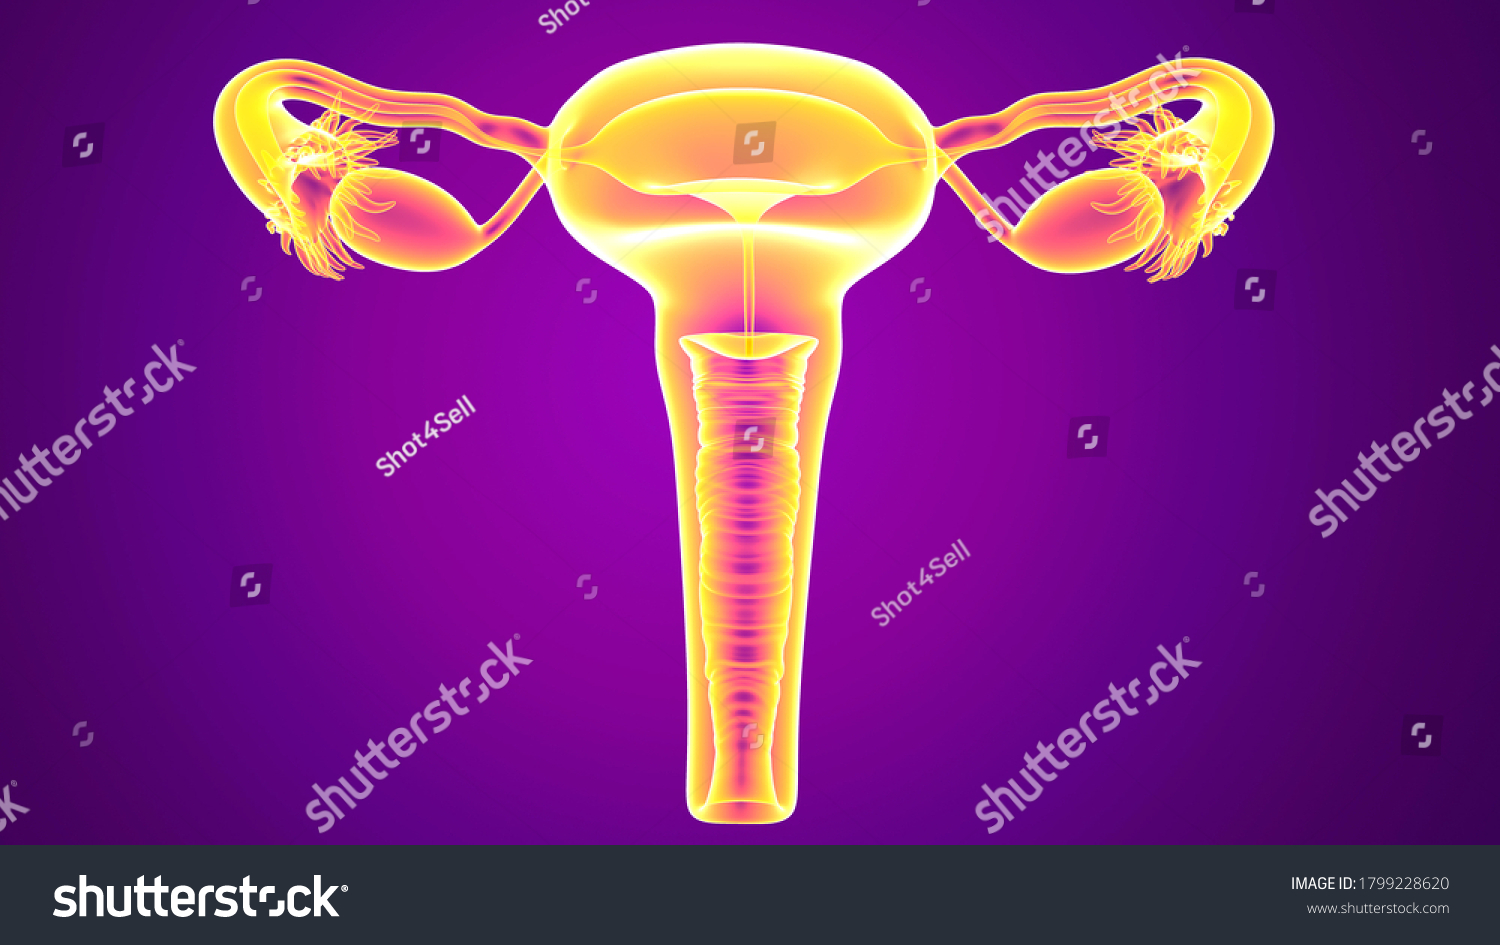 Female Reproductive System Contains Two Main Stock Illustration 1799228620 3496